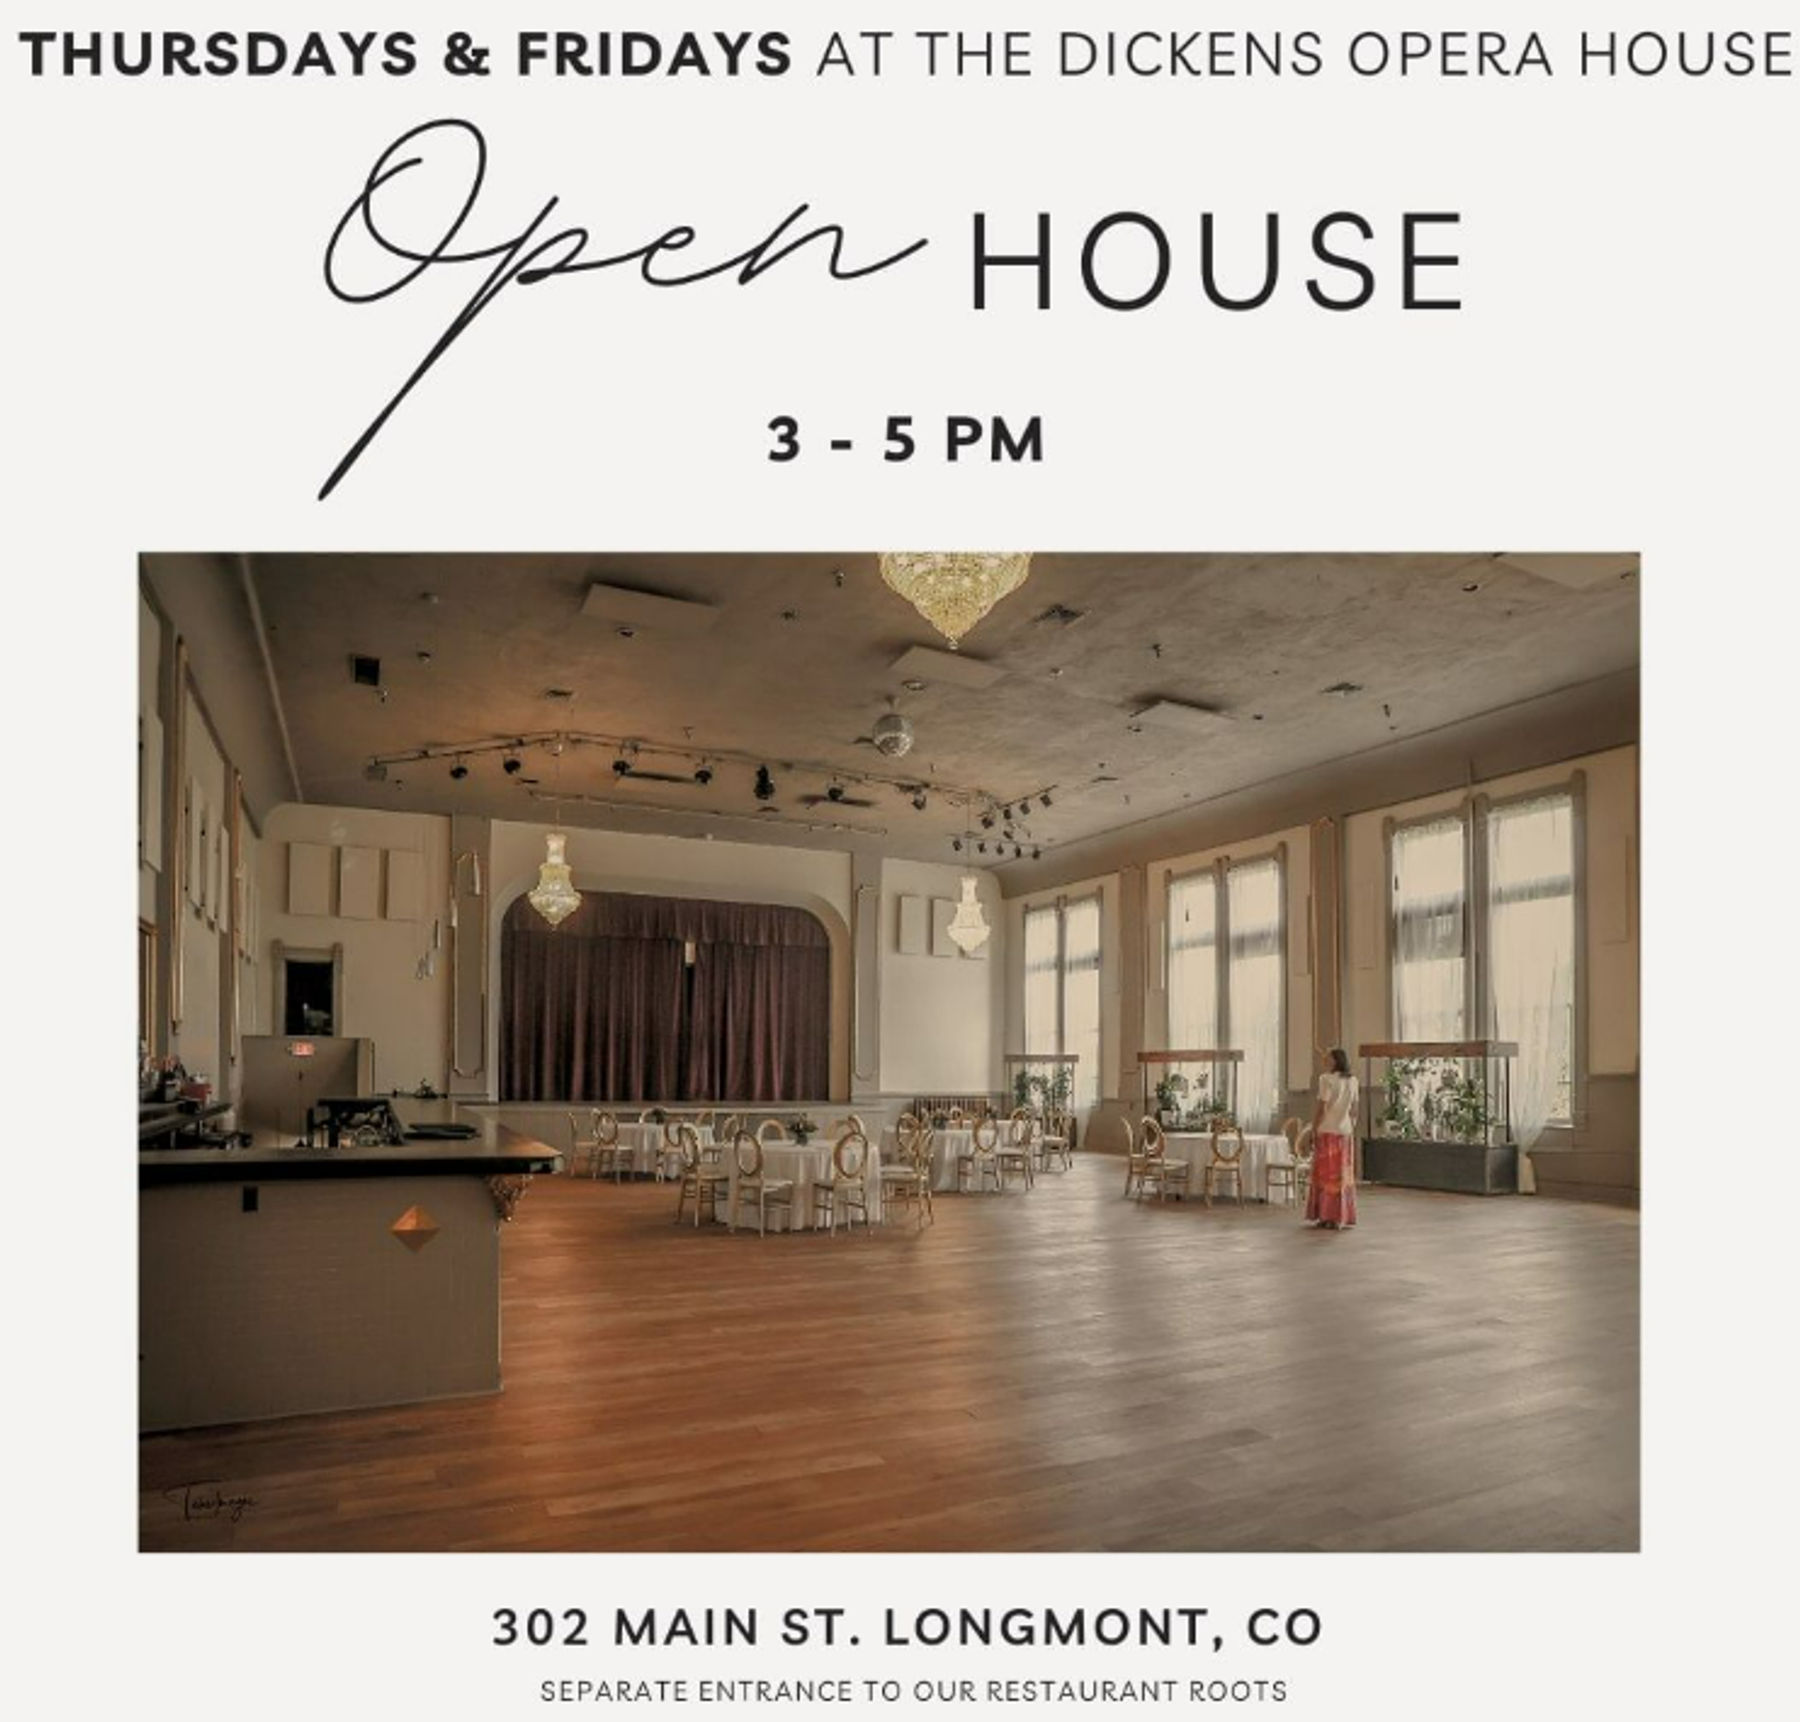 Dickens Opera House Tours - Open House